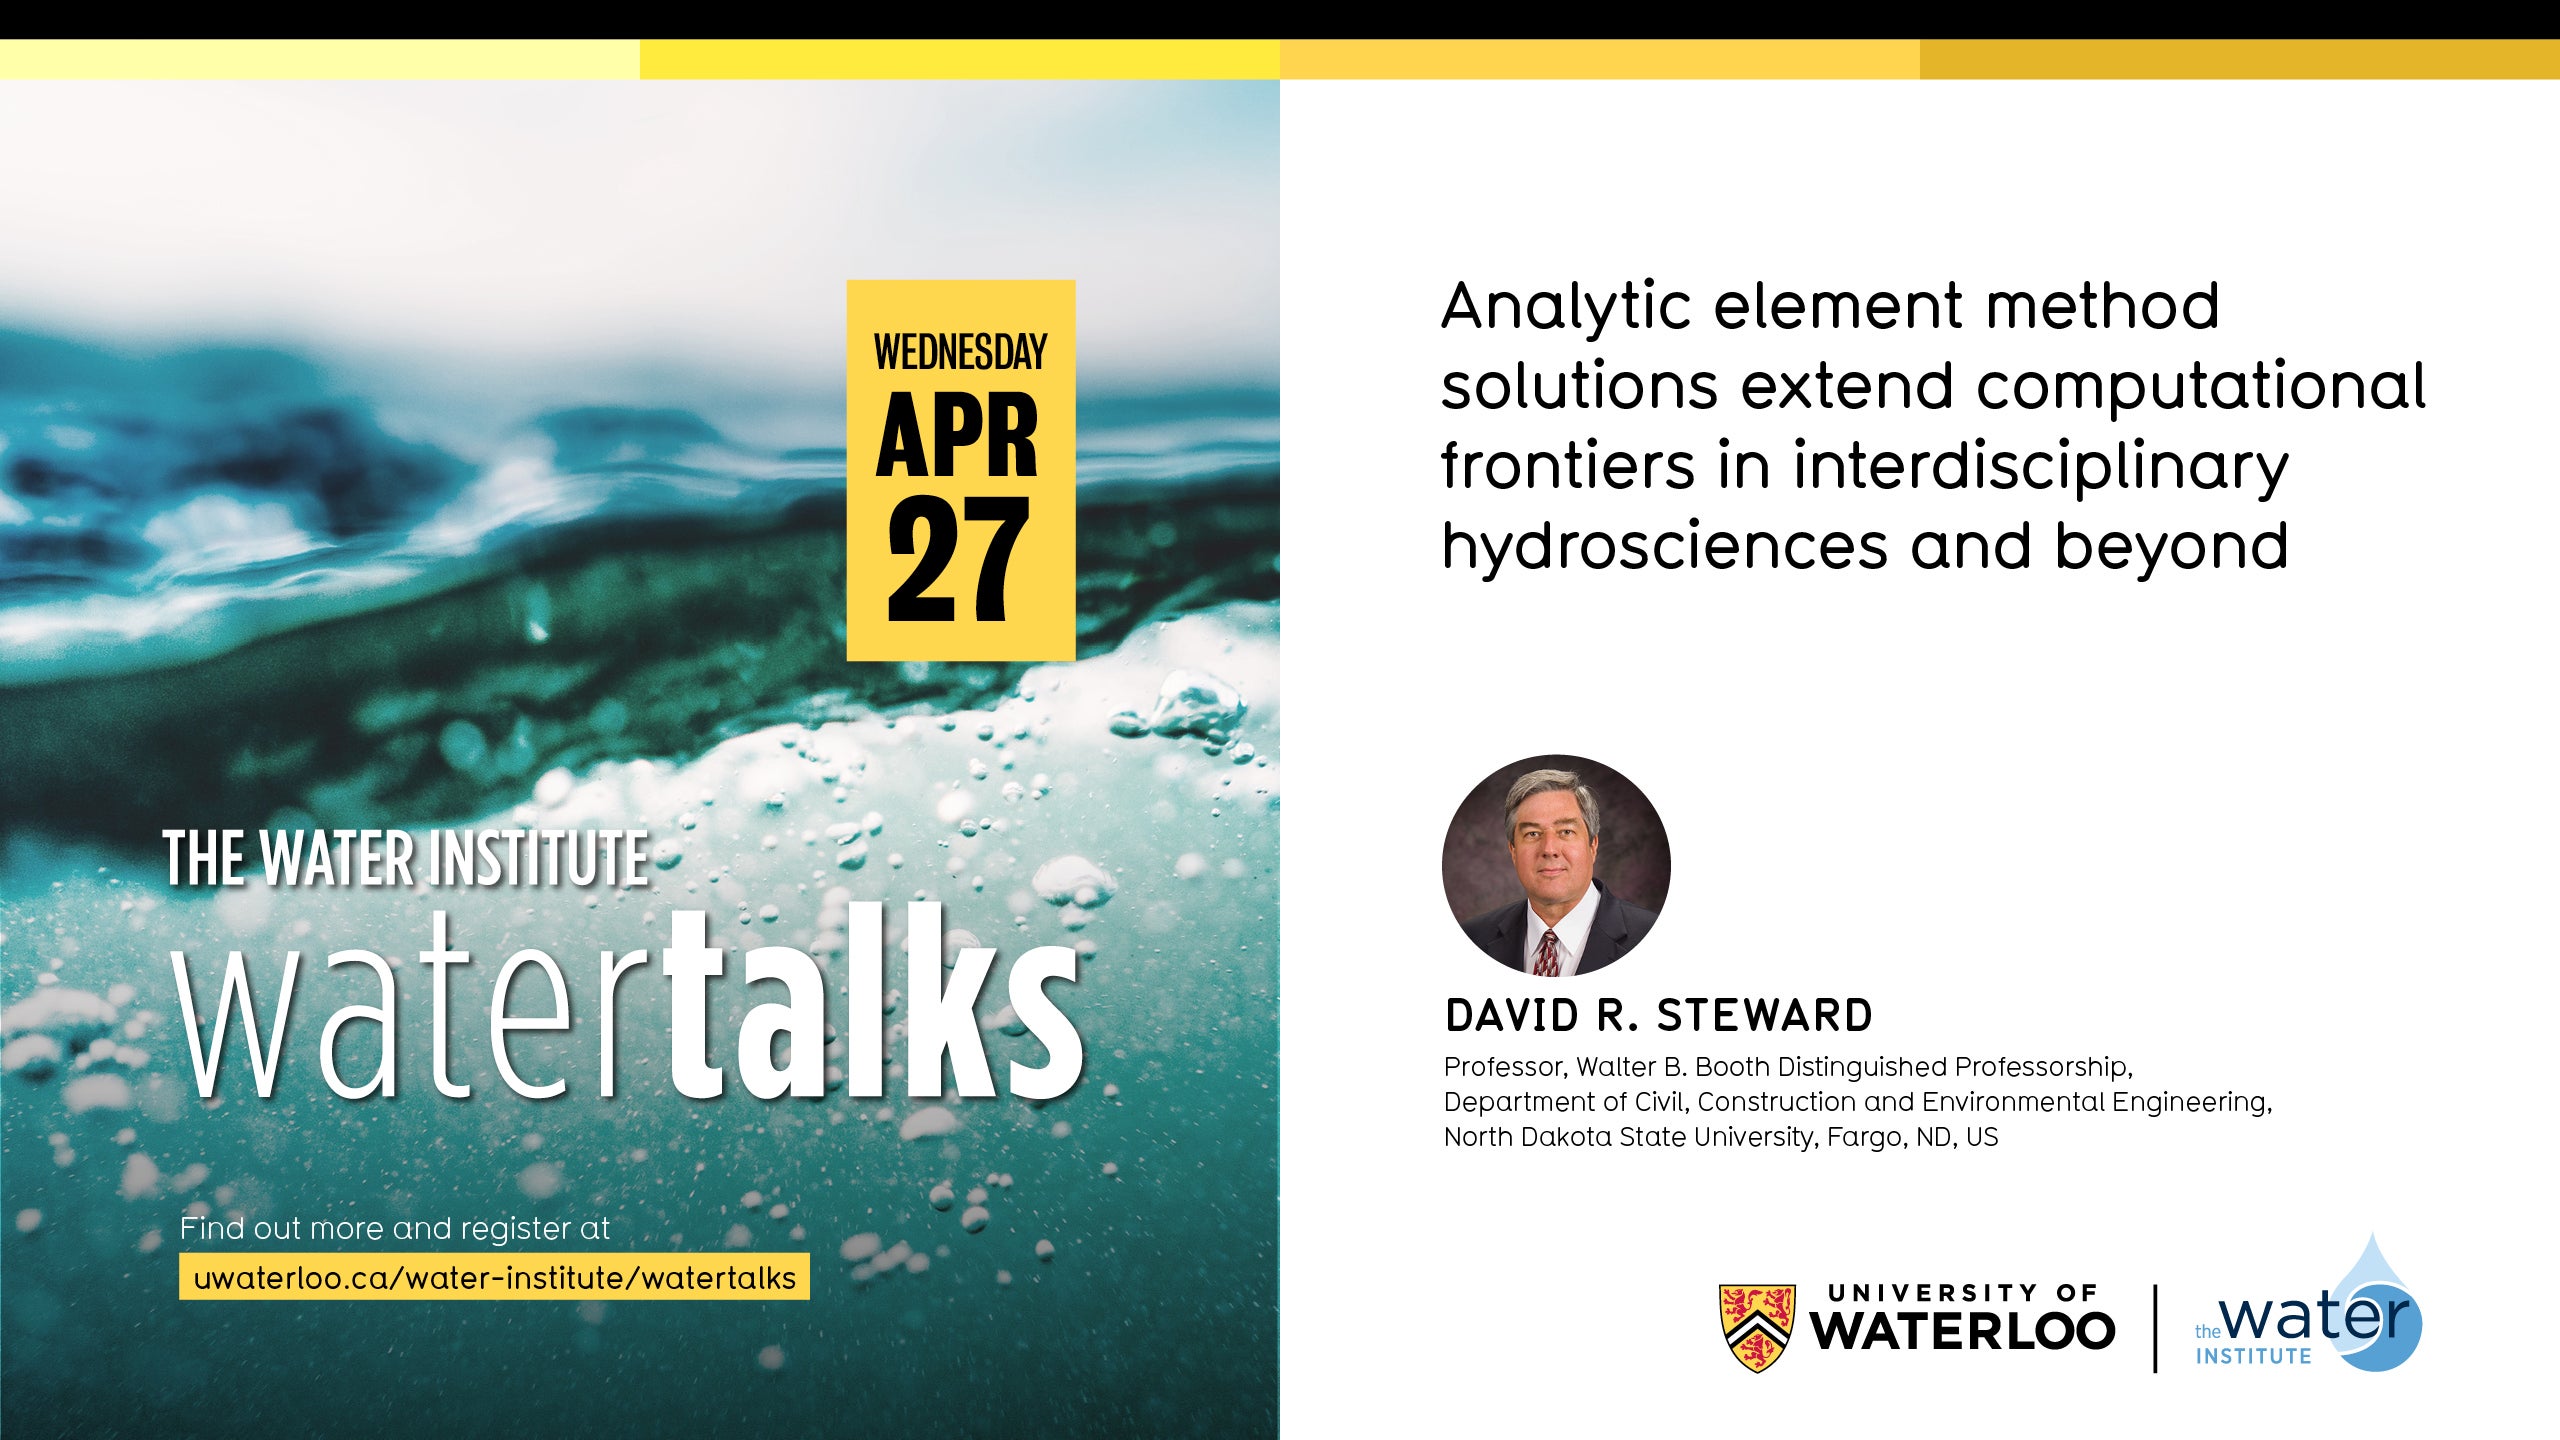 WaterTalk: Analytic element method solutions extend computational frontiers in interdisciplinary hydrosciences and beyond